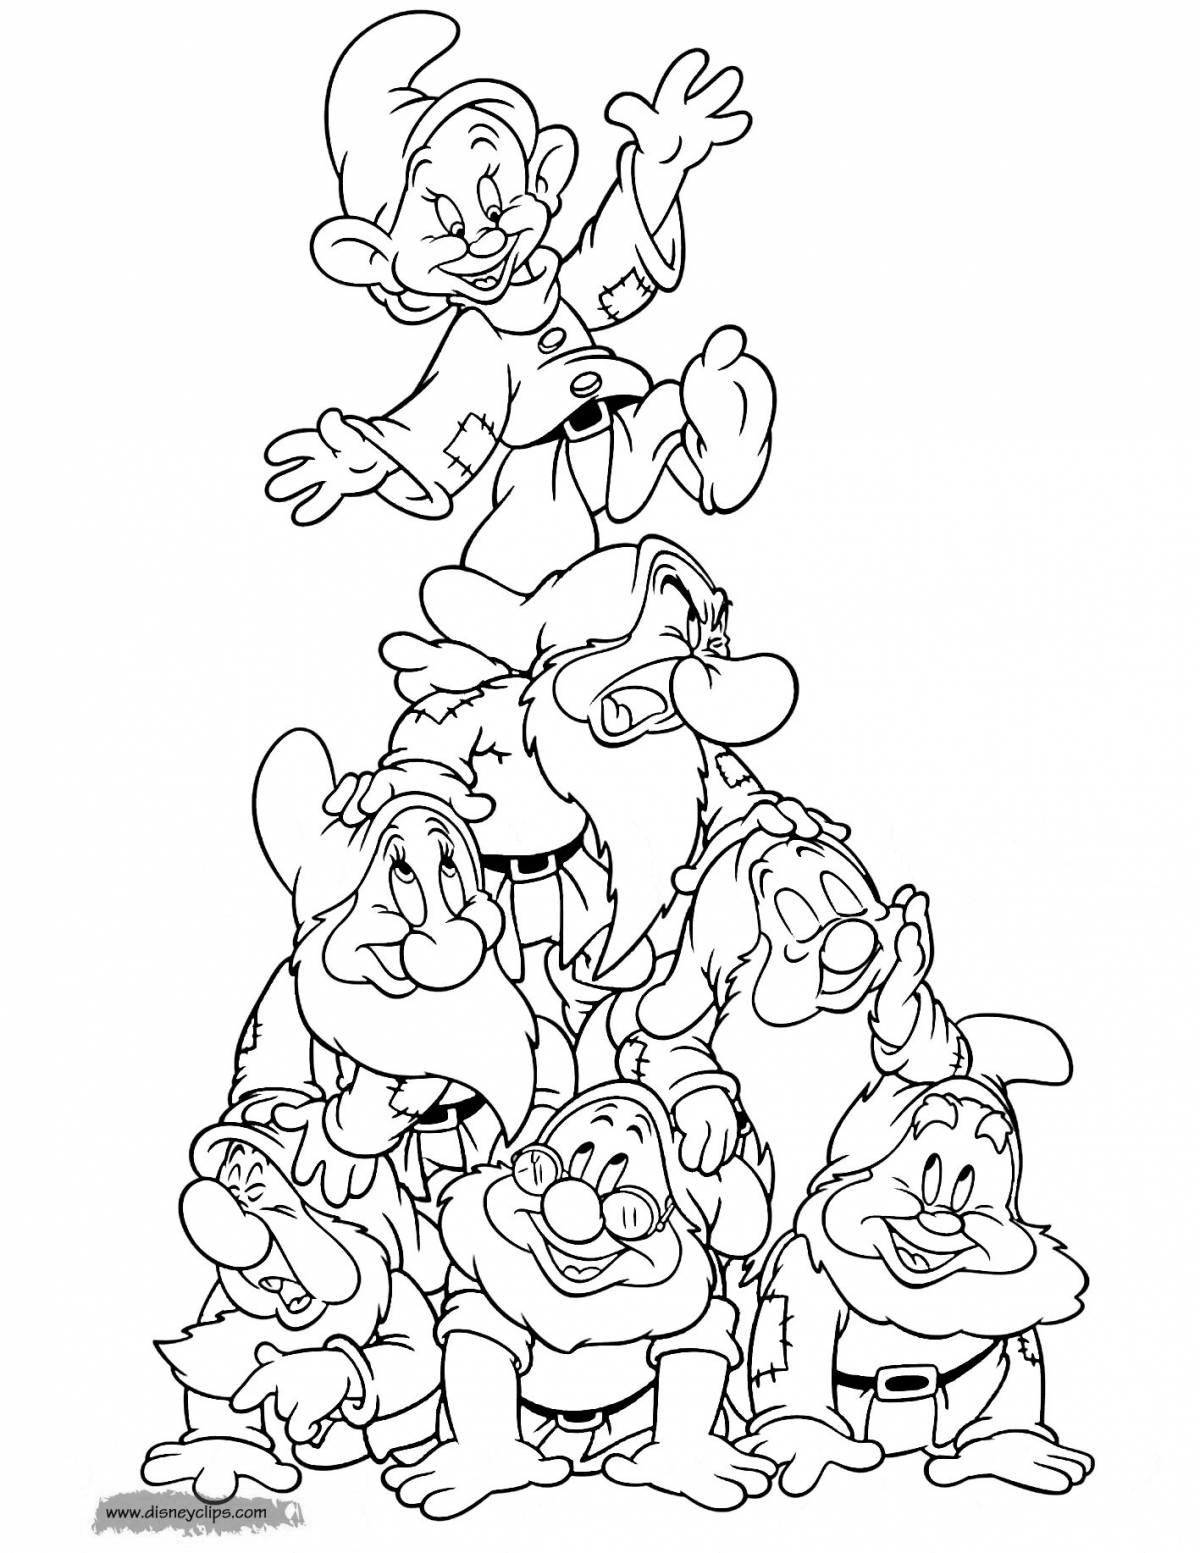 Animated 7 dwarf coloring page